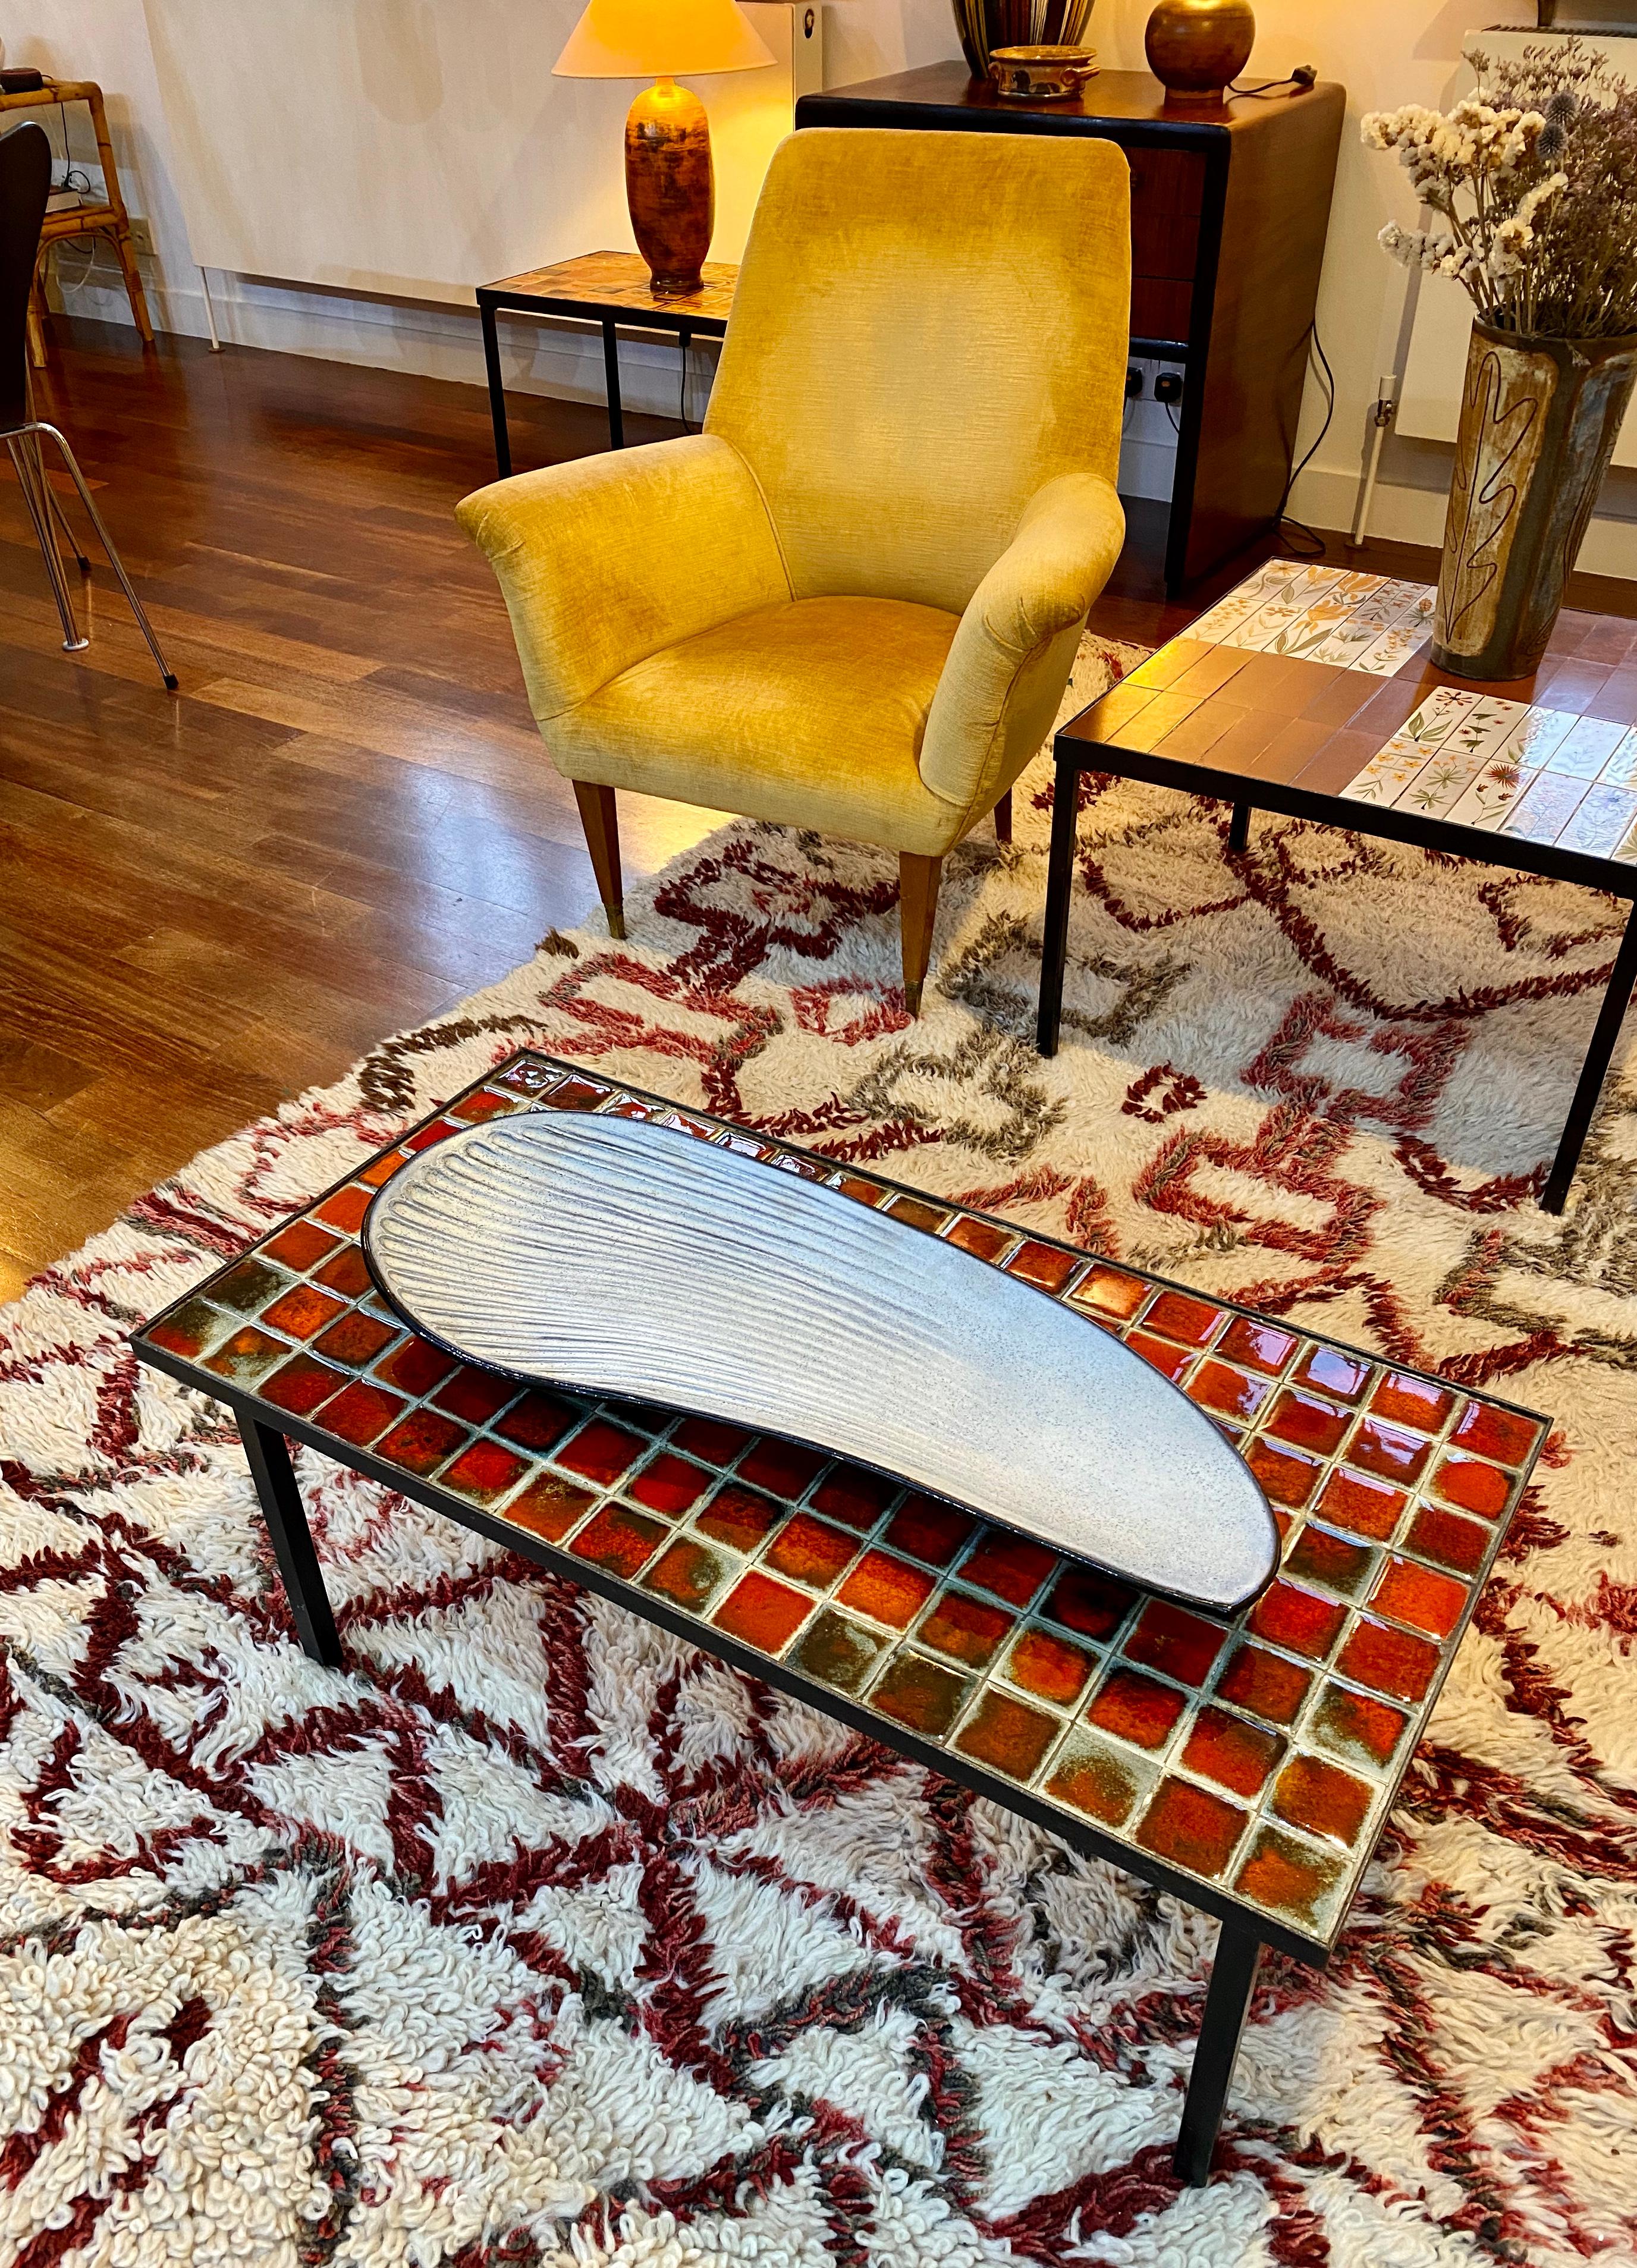 Oyster shell-shaped ceramic platter by French ceramicist, Marcel Guillot (circa 1960s). An impressively large platter with speckled, matt, off-white interior surface with tactile ridges such as those on an oyster shell. In contrast, the bottom